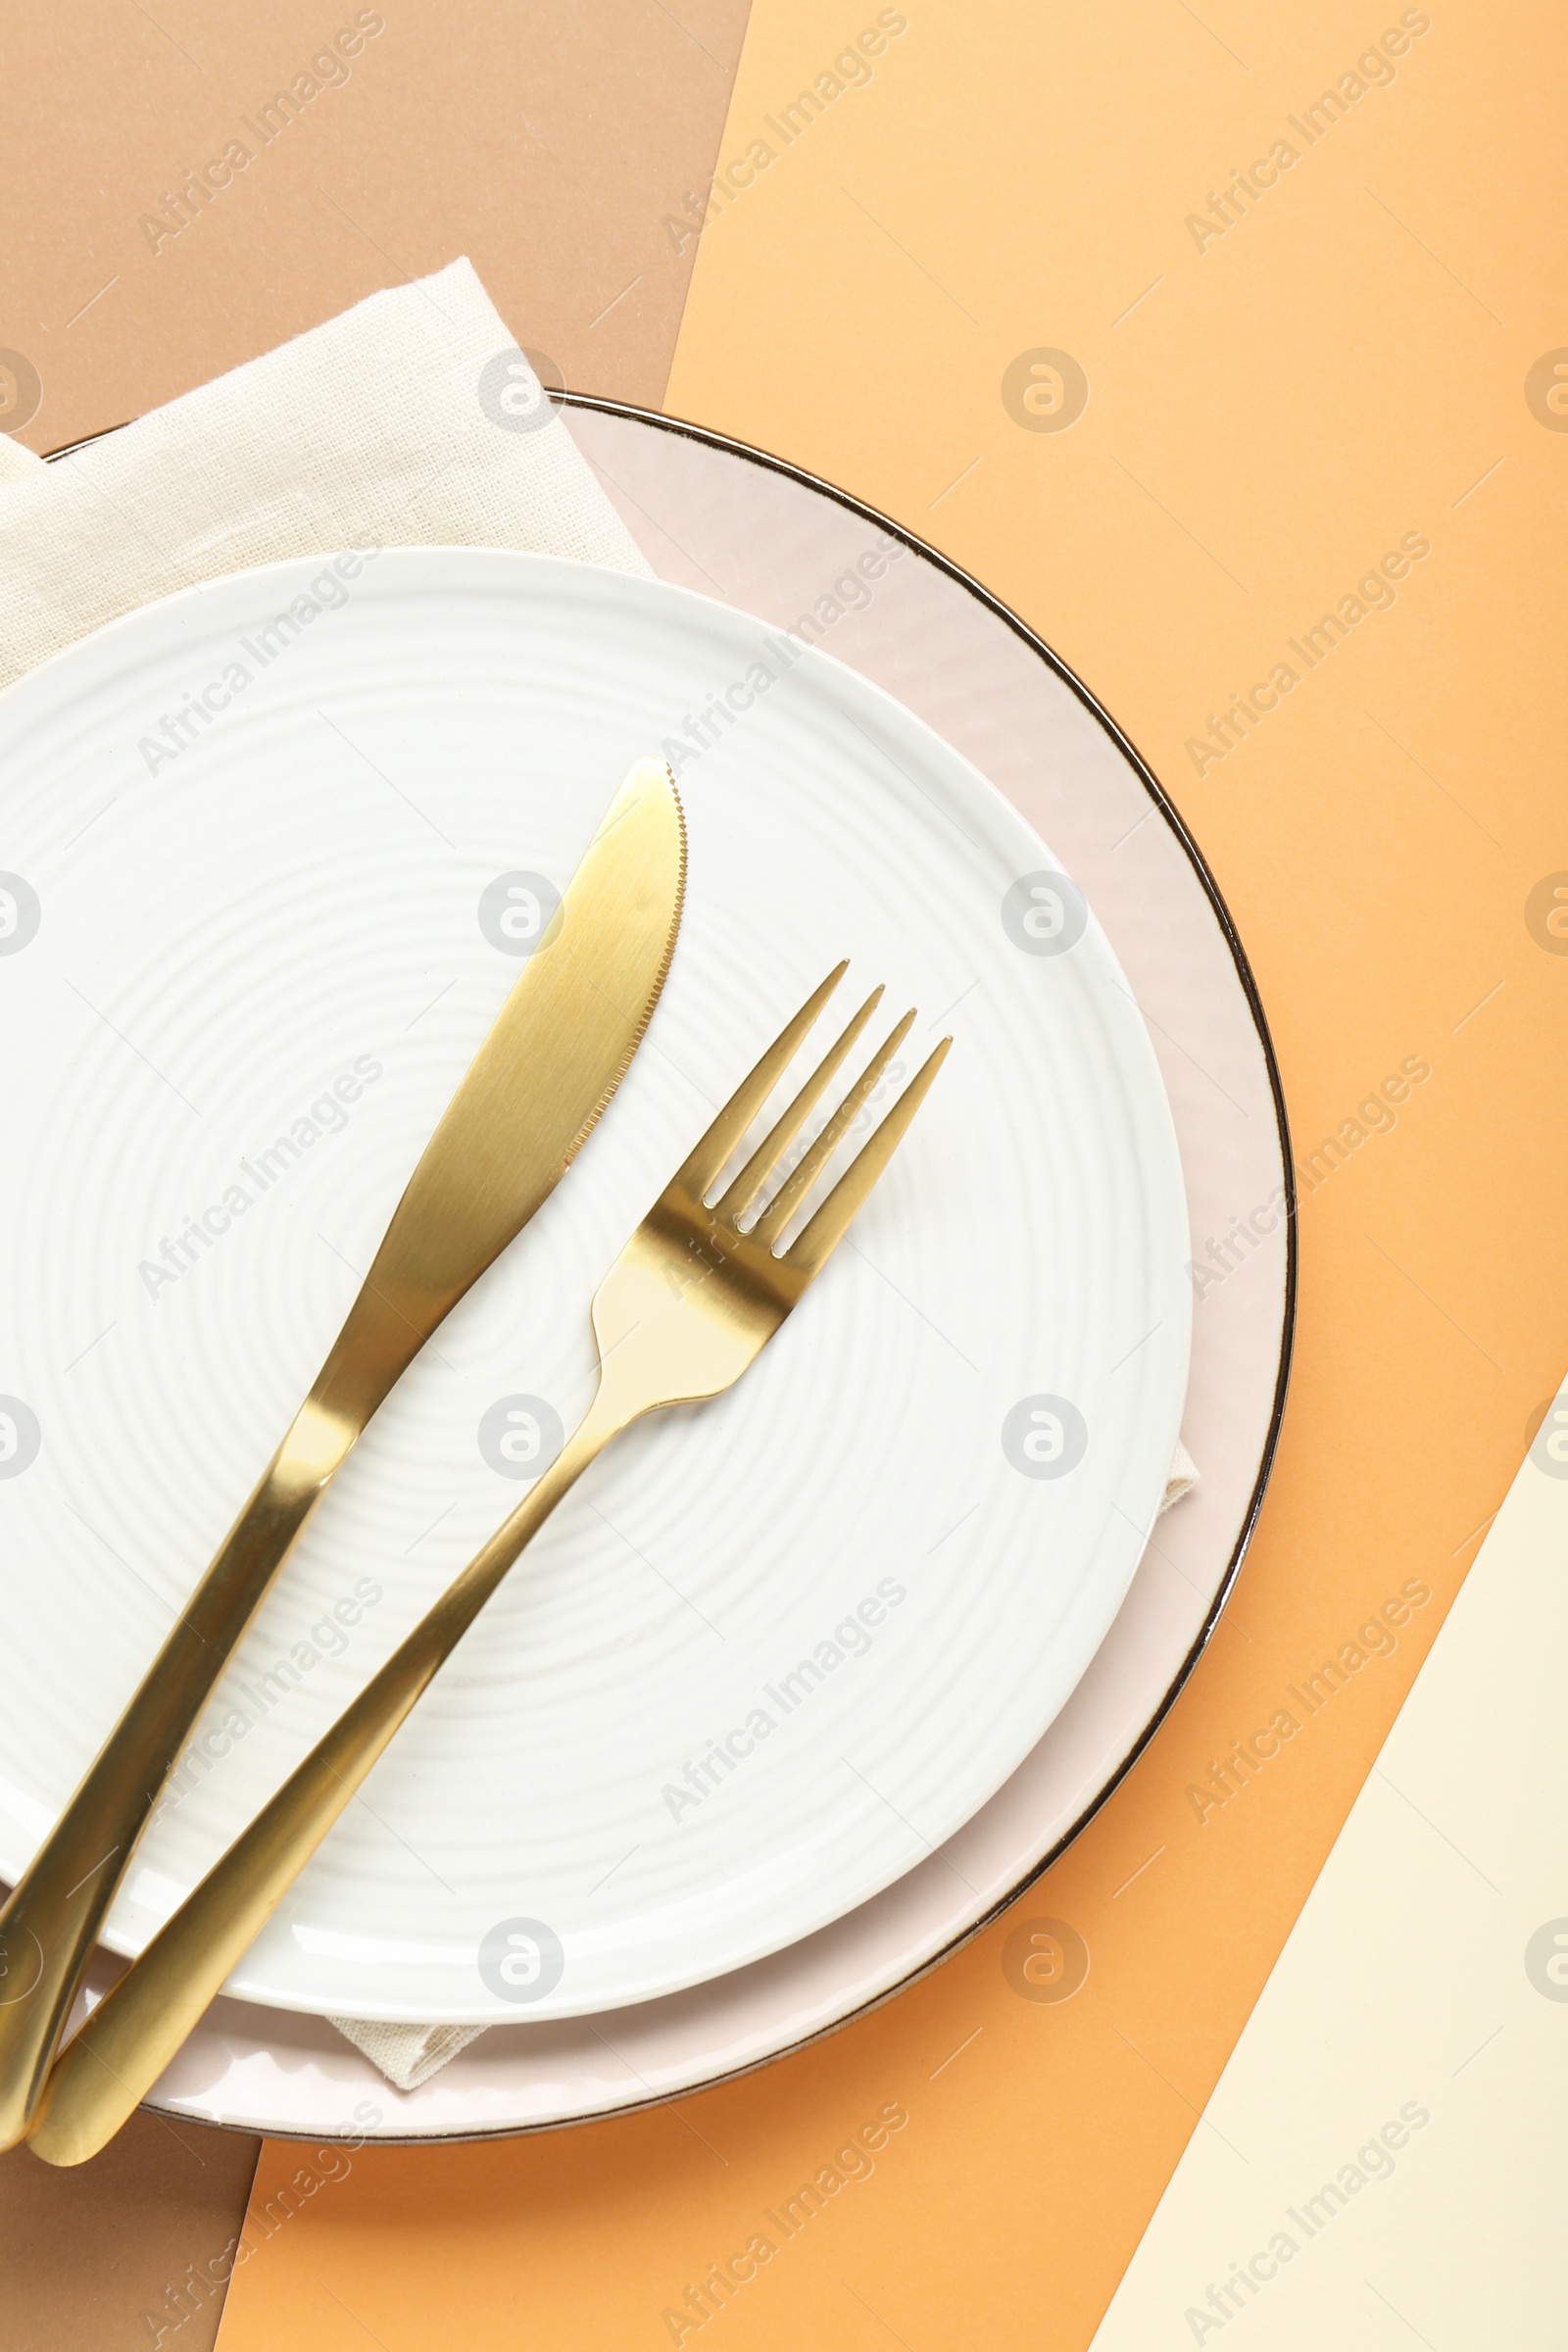 Photo of Ceramic plates, cutlery and napkin on color background, top view